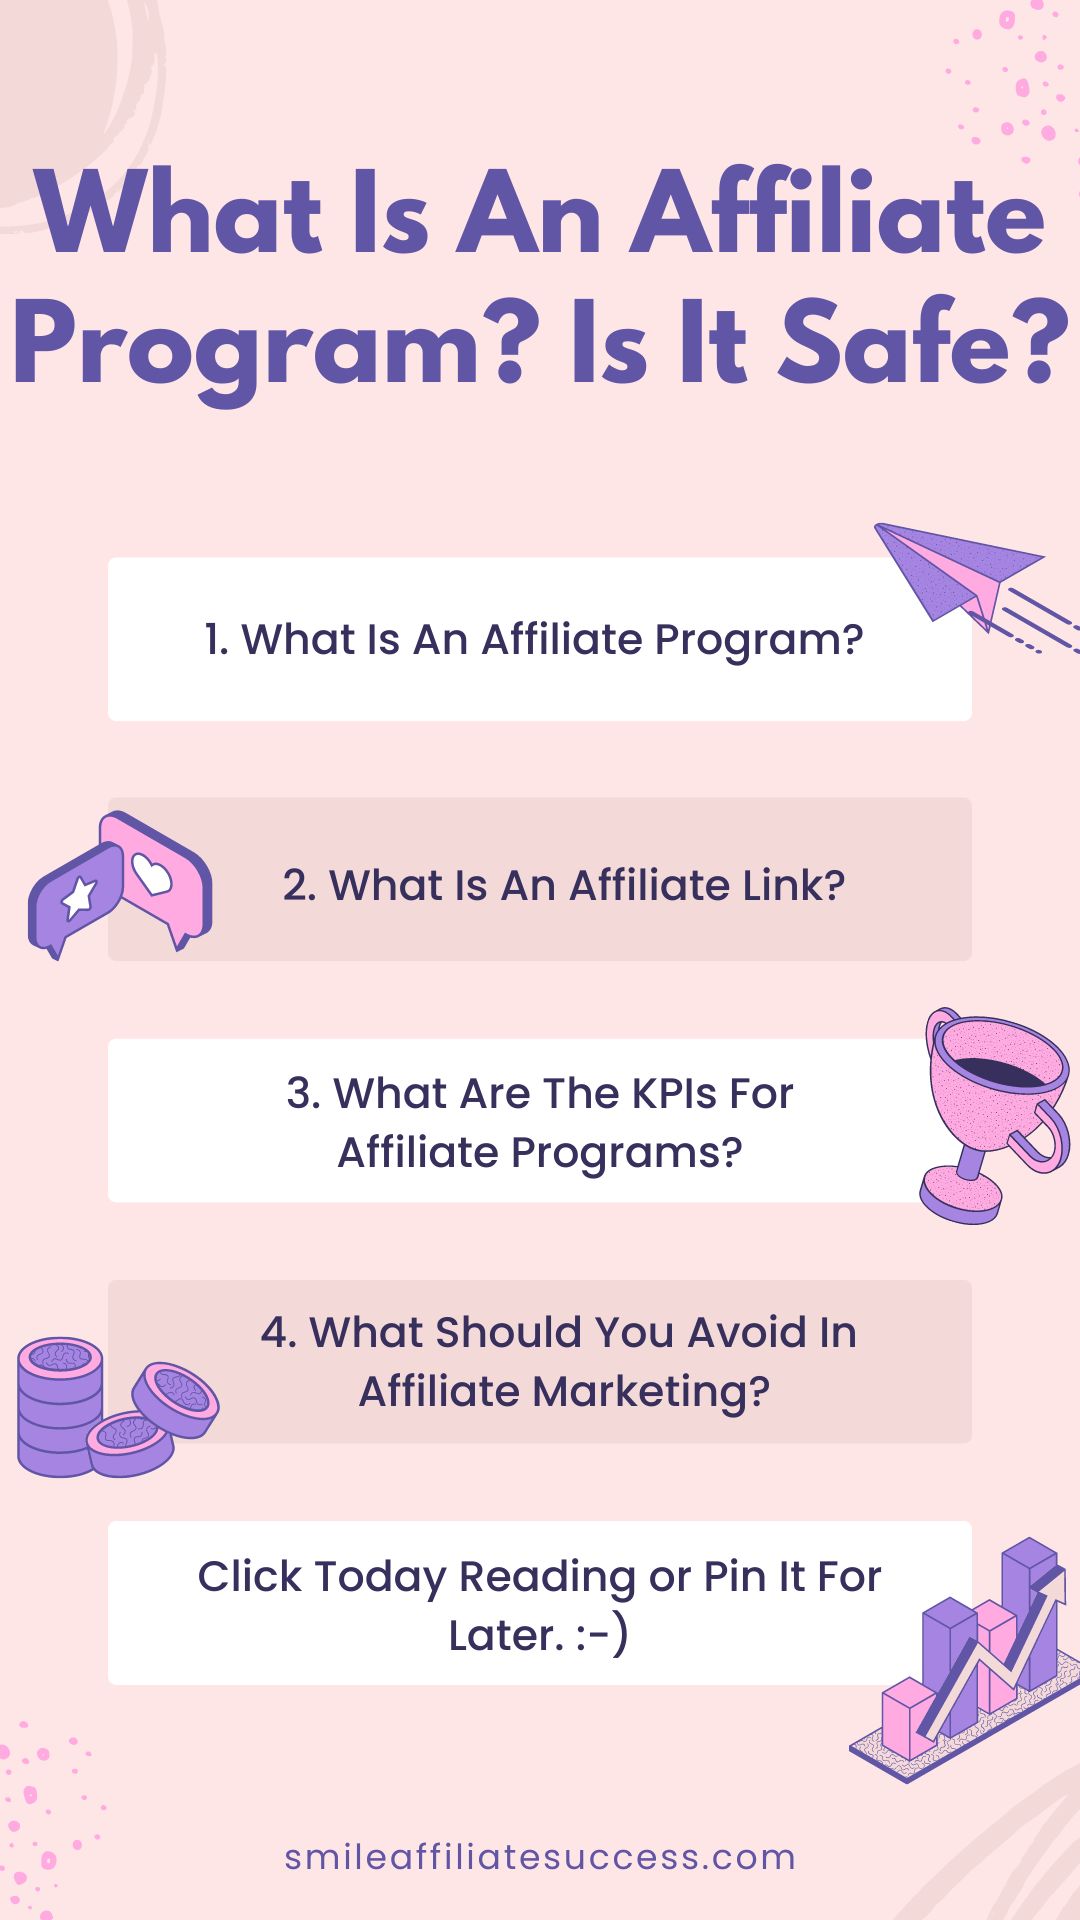 What Is An Affiliate Program? Is It Safe?